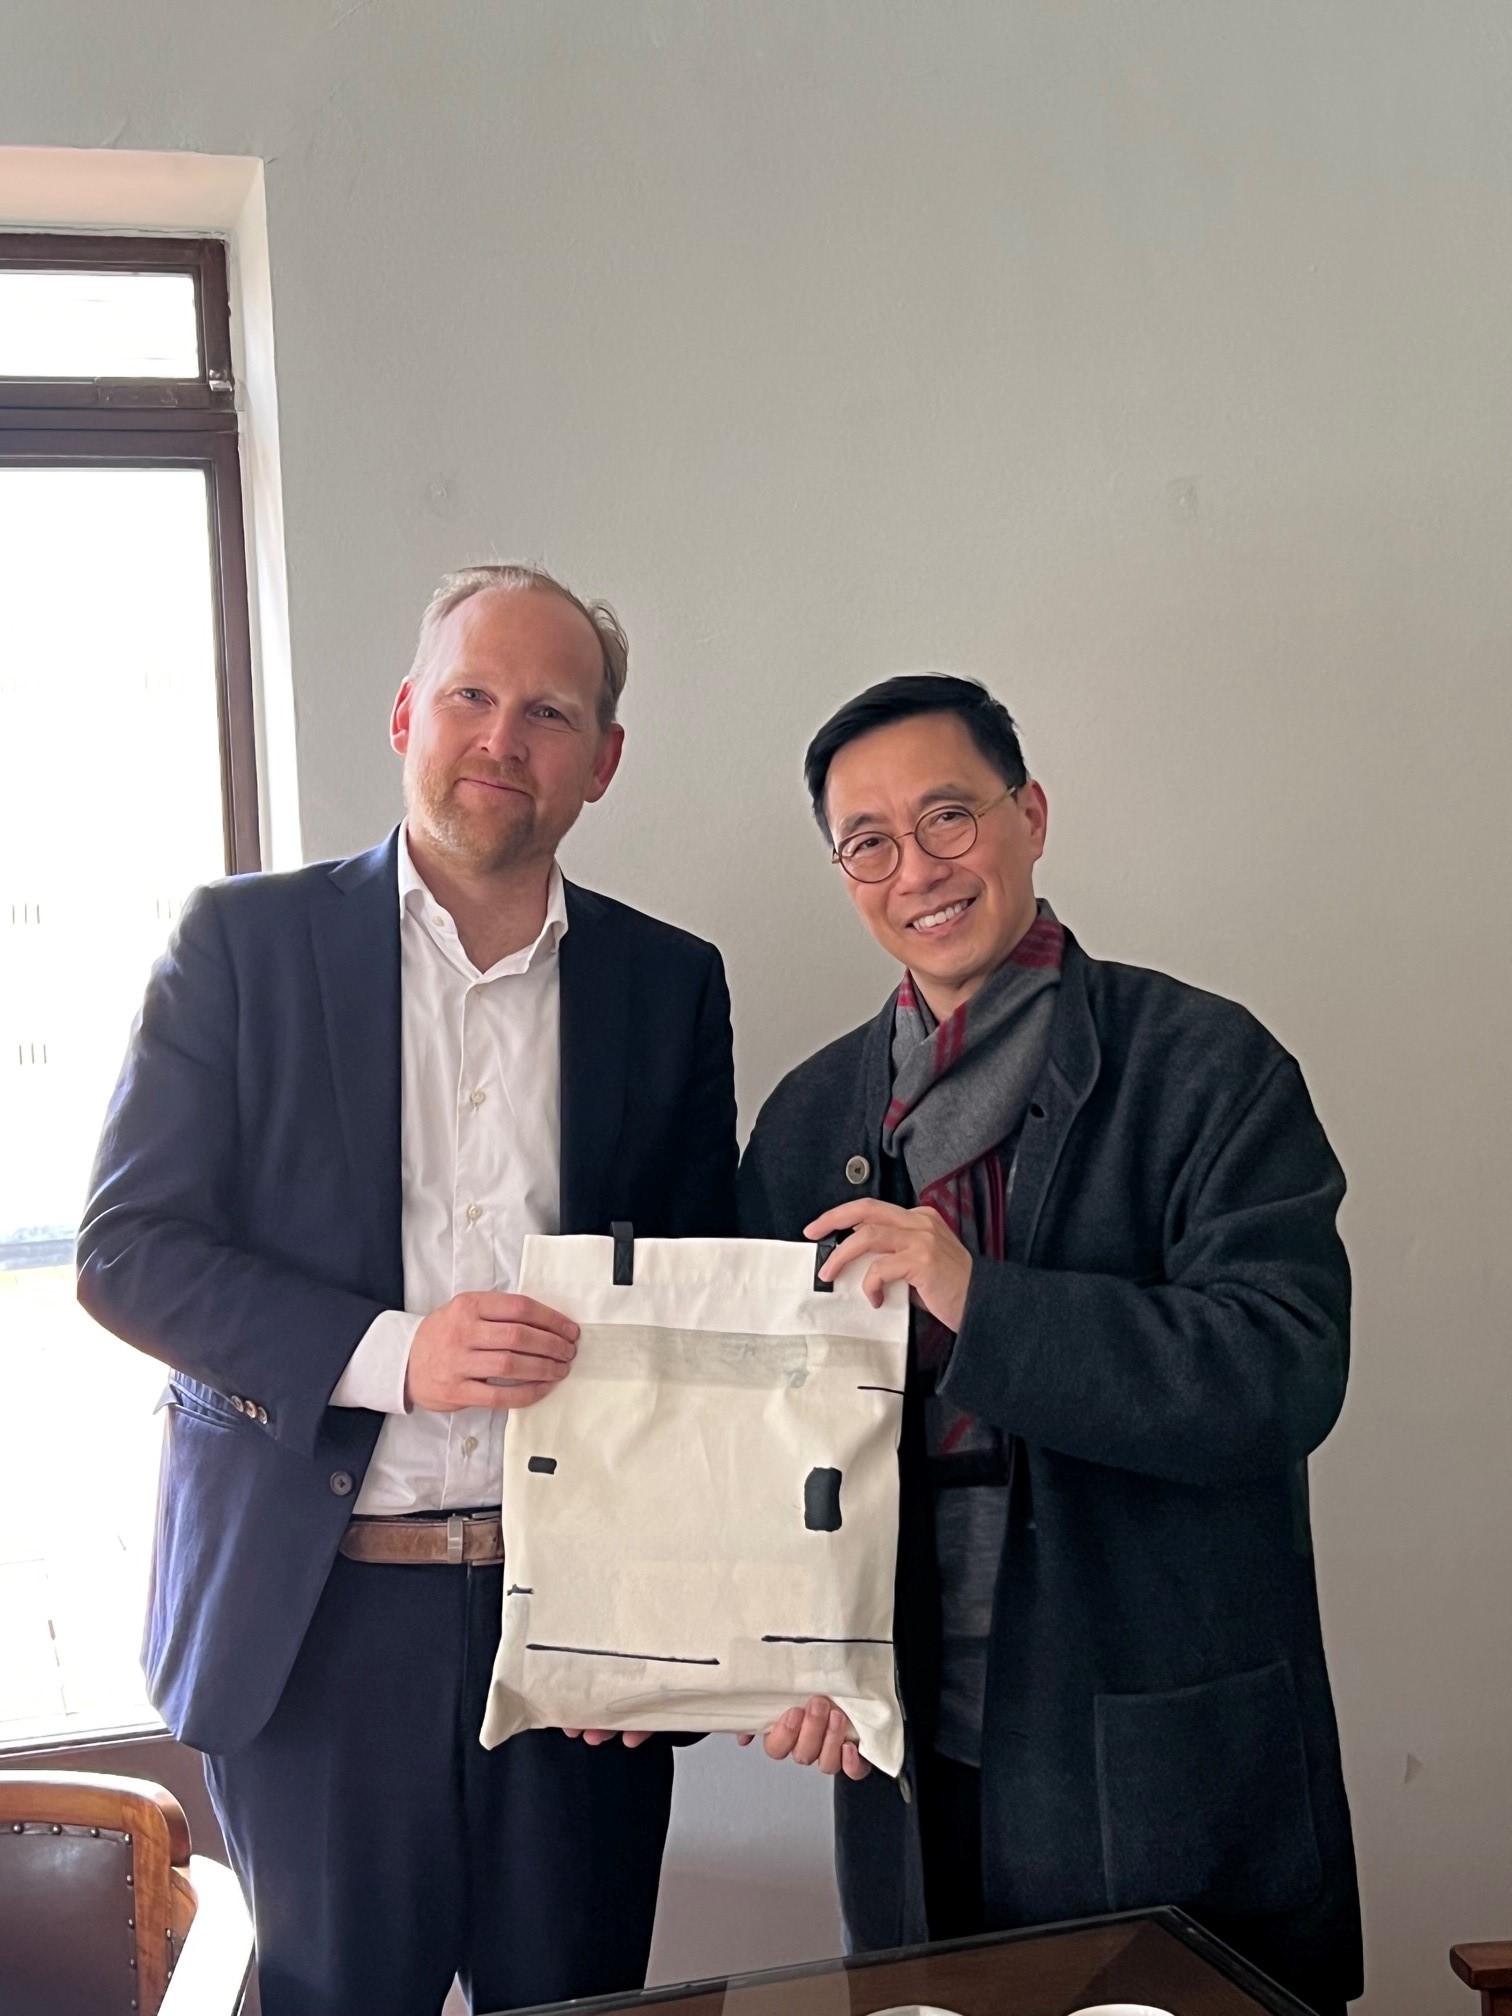 The Secretary for Culture, Sports and Tourism, Mr Kevin Yeung visited the Kunstmuseum Den Haag yesterday (March 28, Amsterdam time). Photo shows Mr Yeung (right) presenting a souvenir from Hong Kong Museum of Art to the Head of Collections, Mr Doede Hardeman (left).